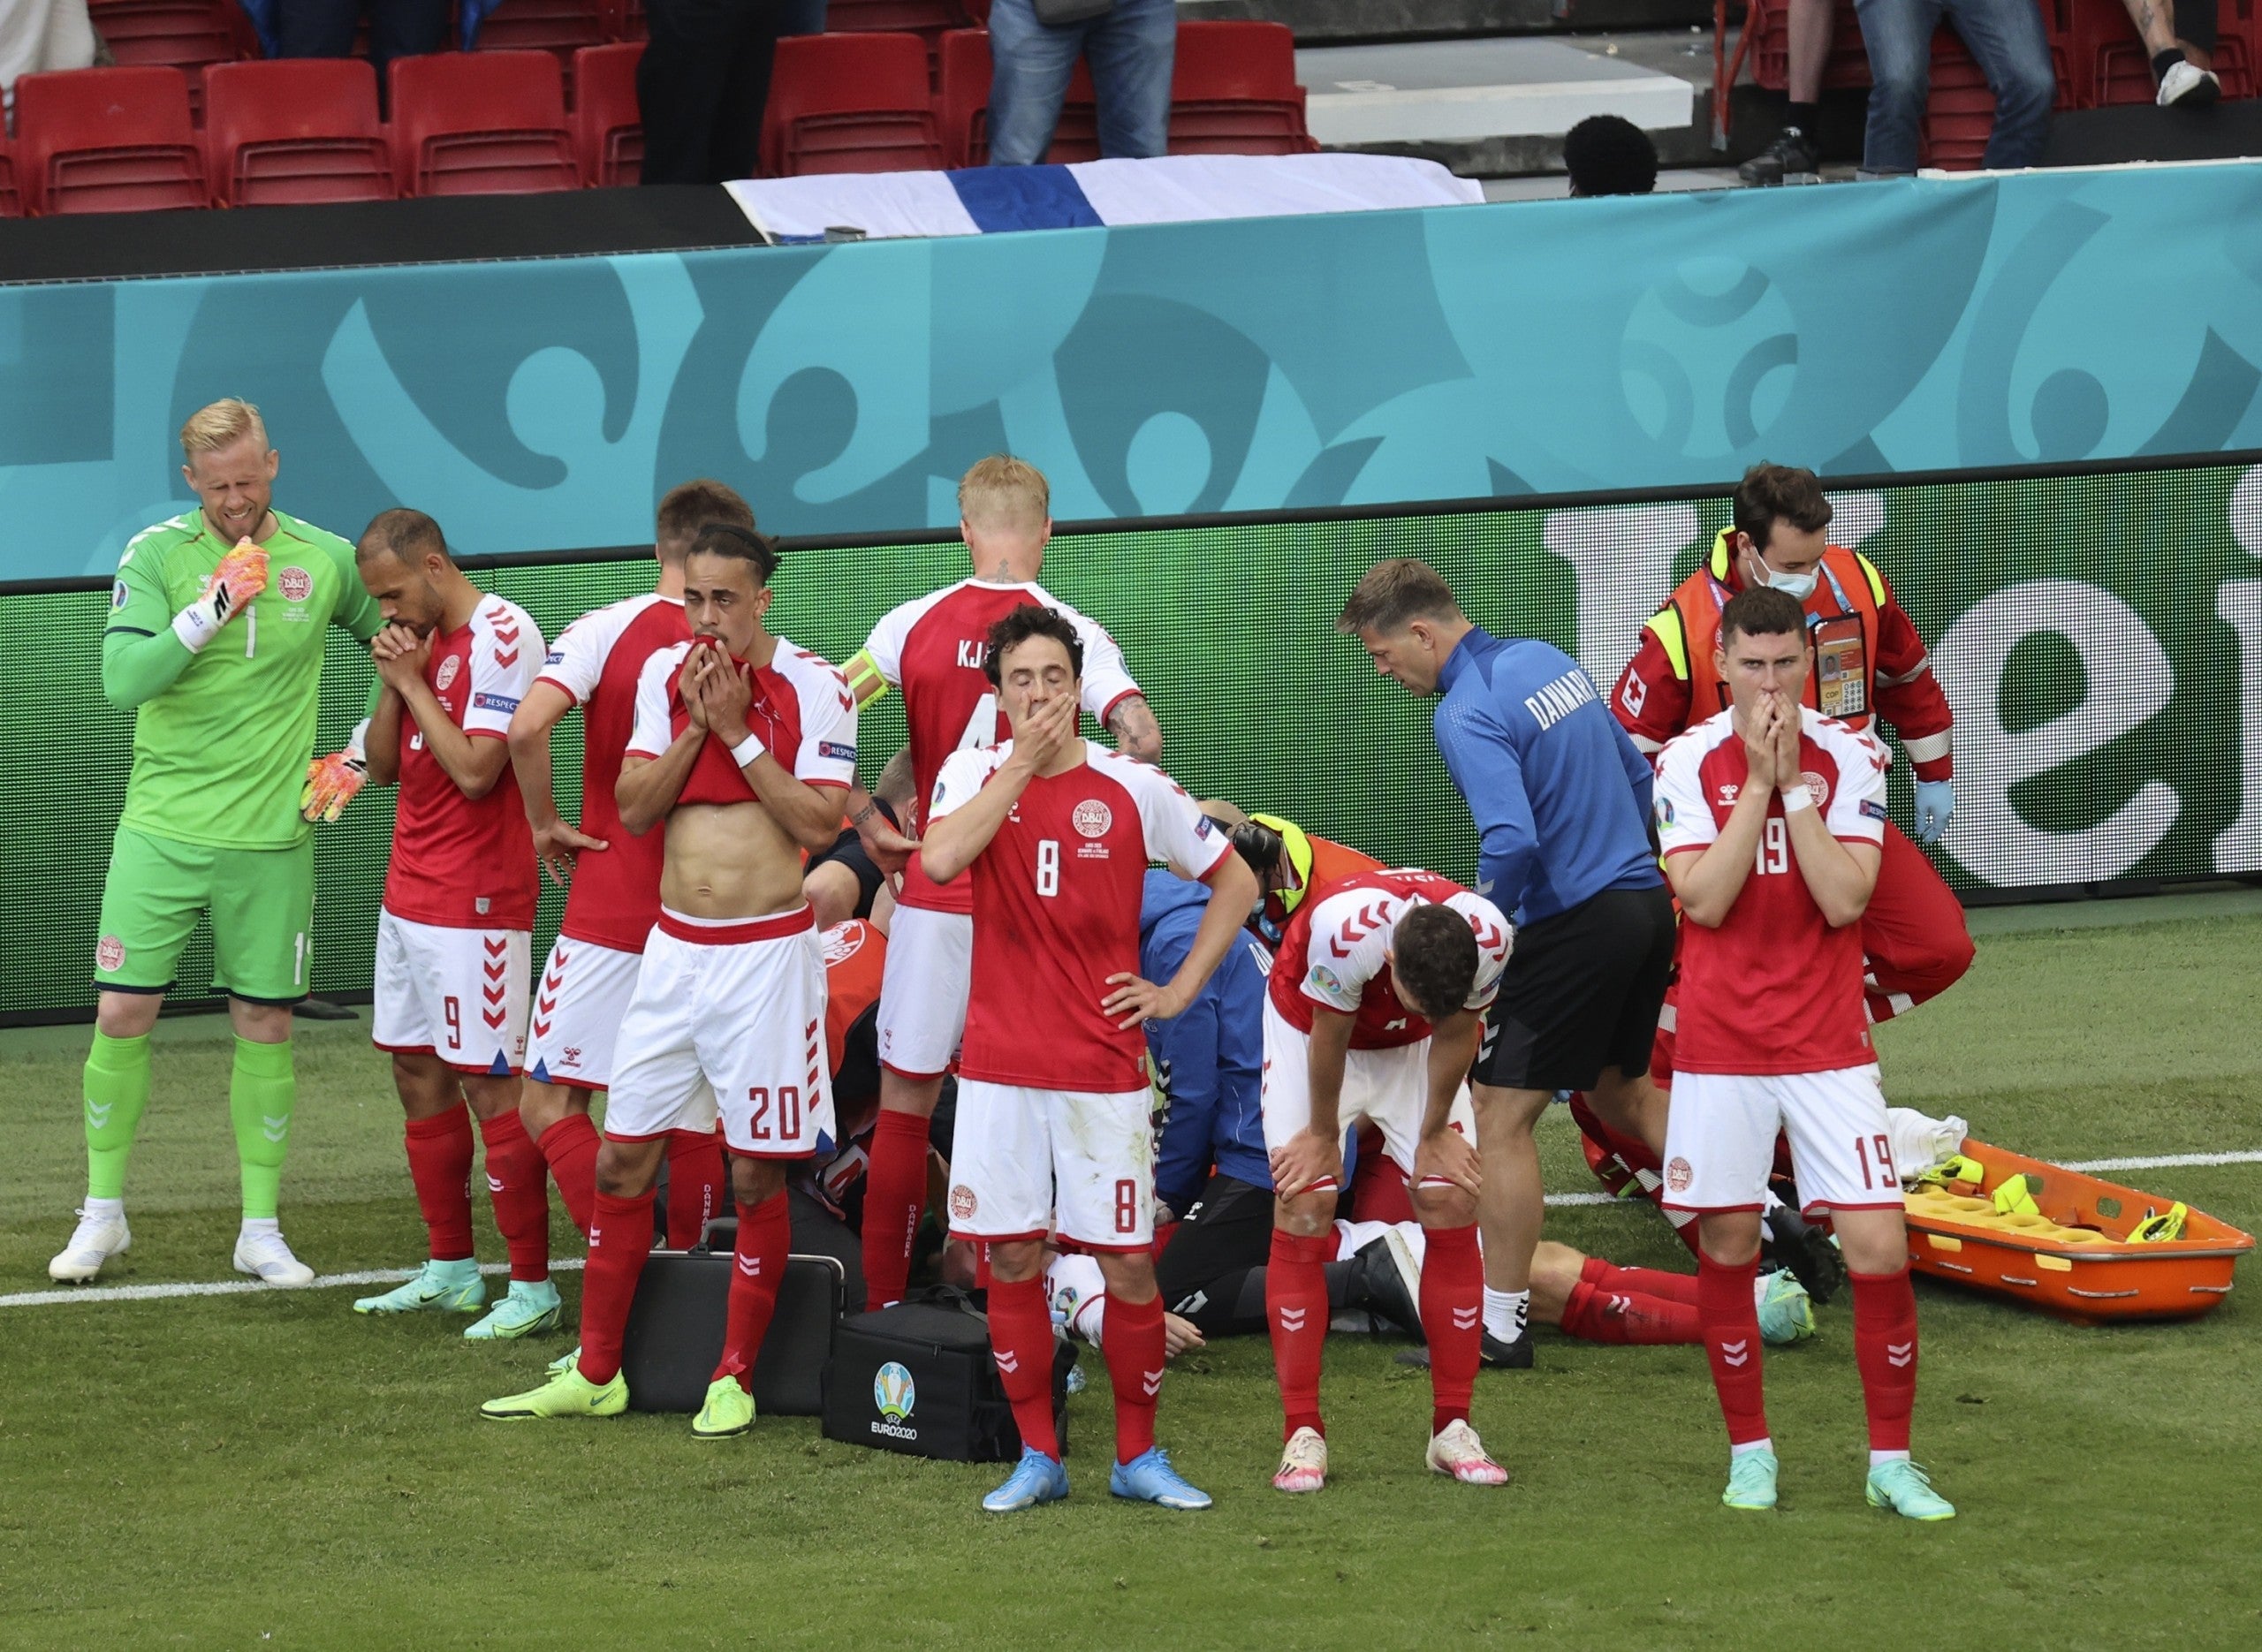 In scary scene at Euro 2020, Denmark's Eriksen collapses on the